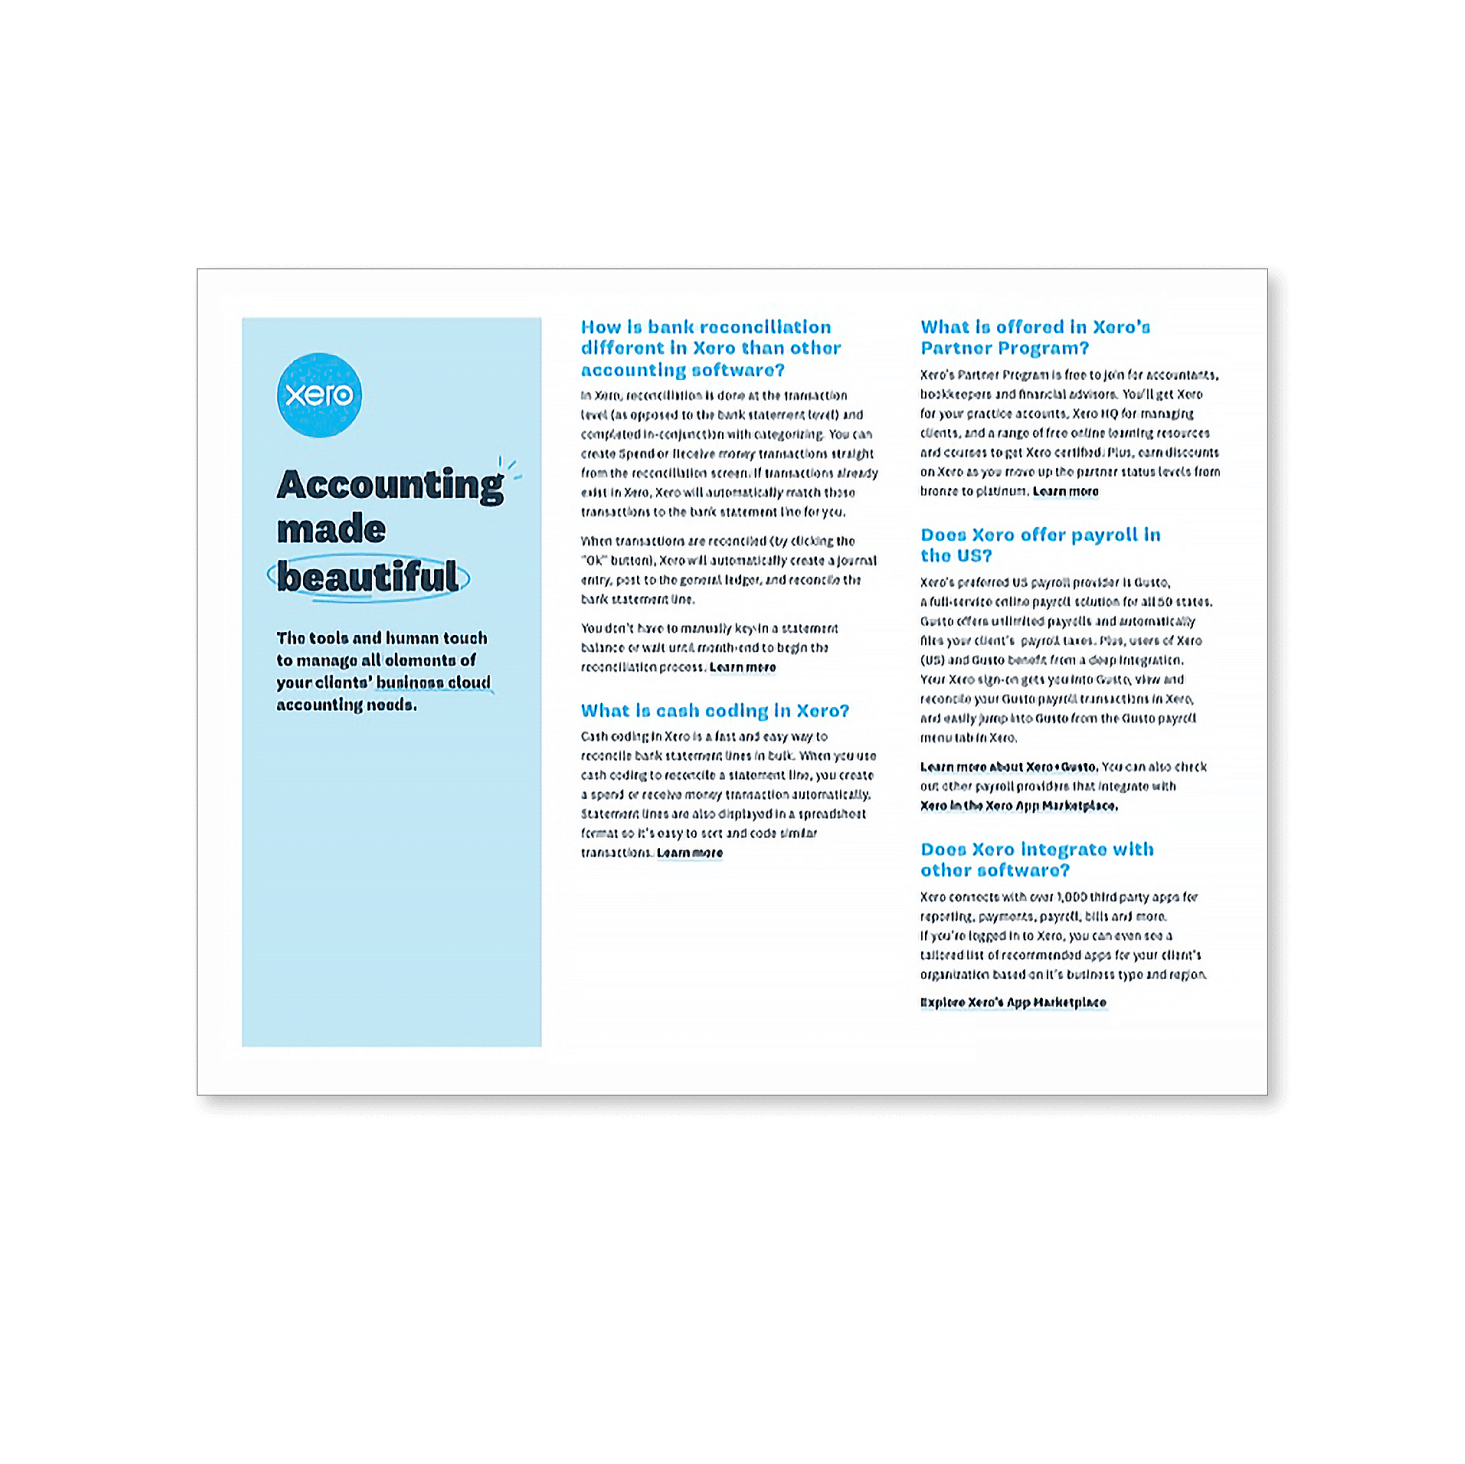 A brochure about Xero titled ‘Accounting made beautiful’.